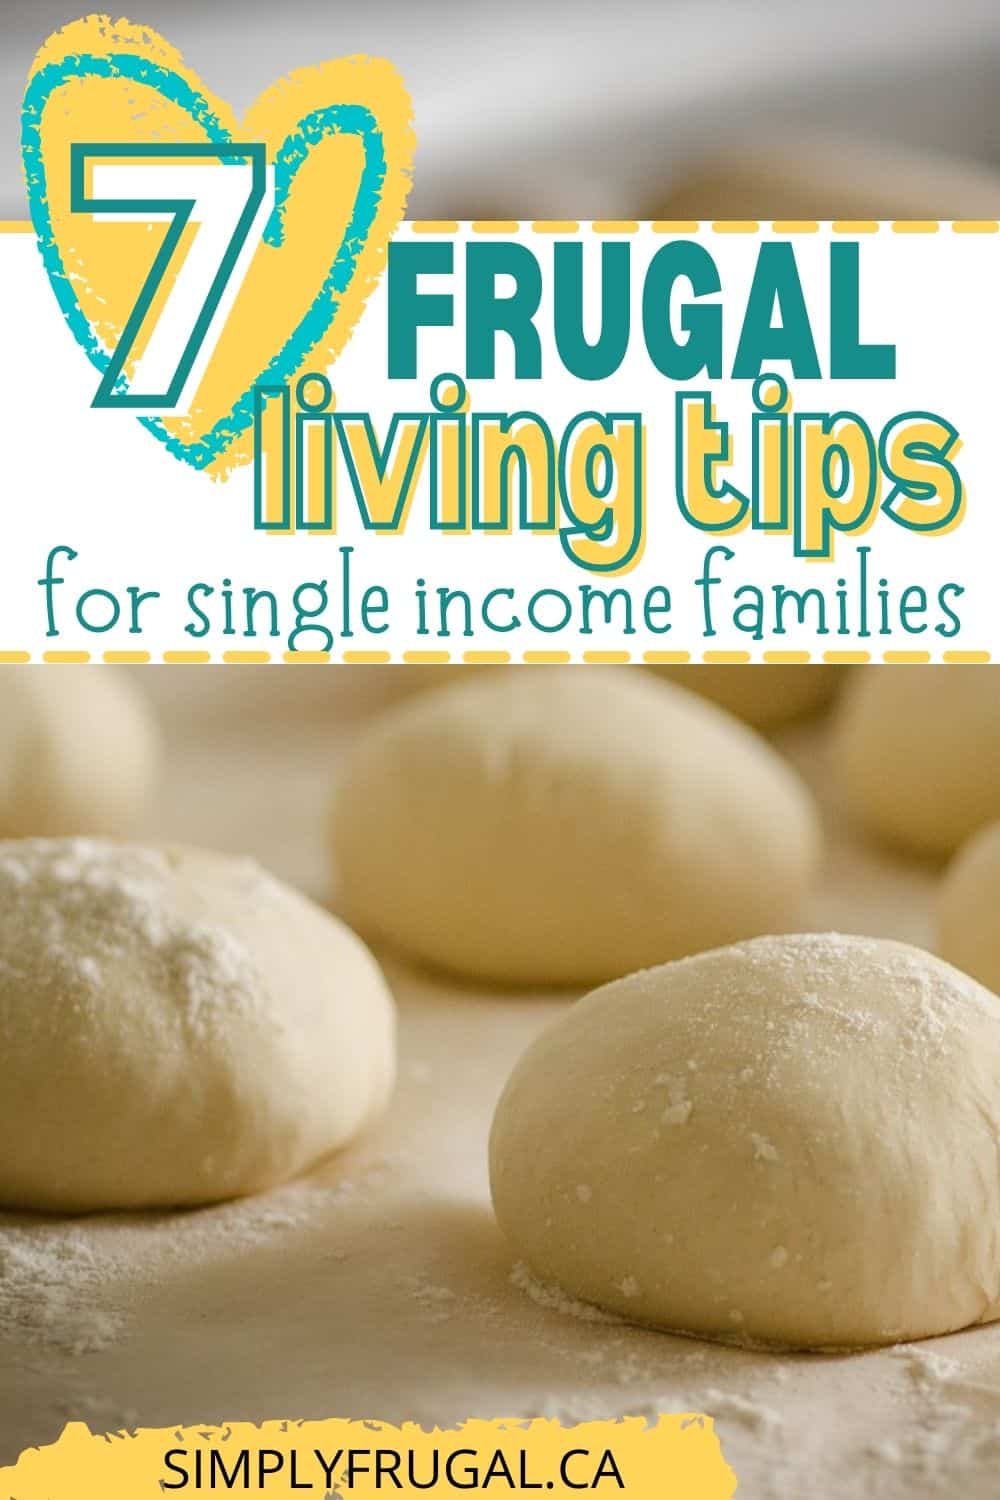 Frugal living tips for single income families